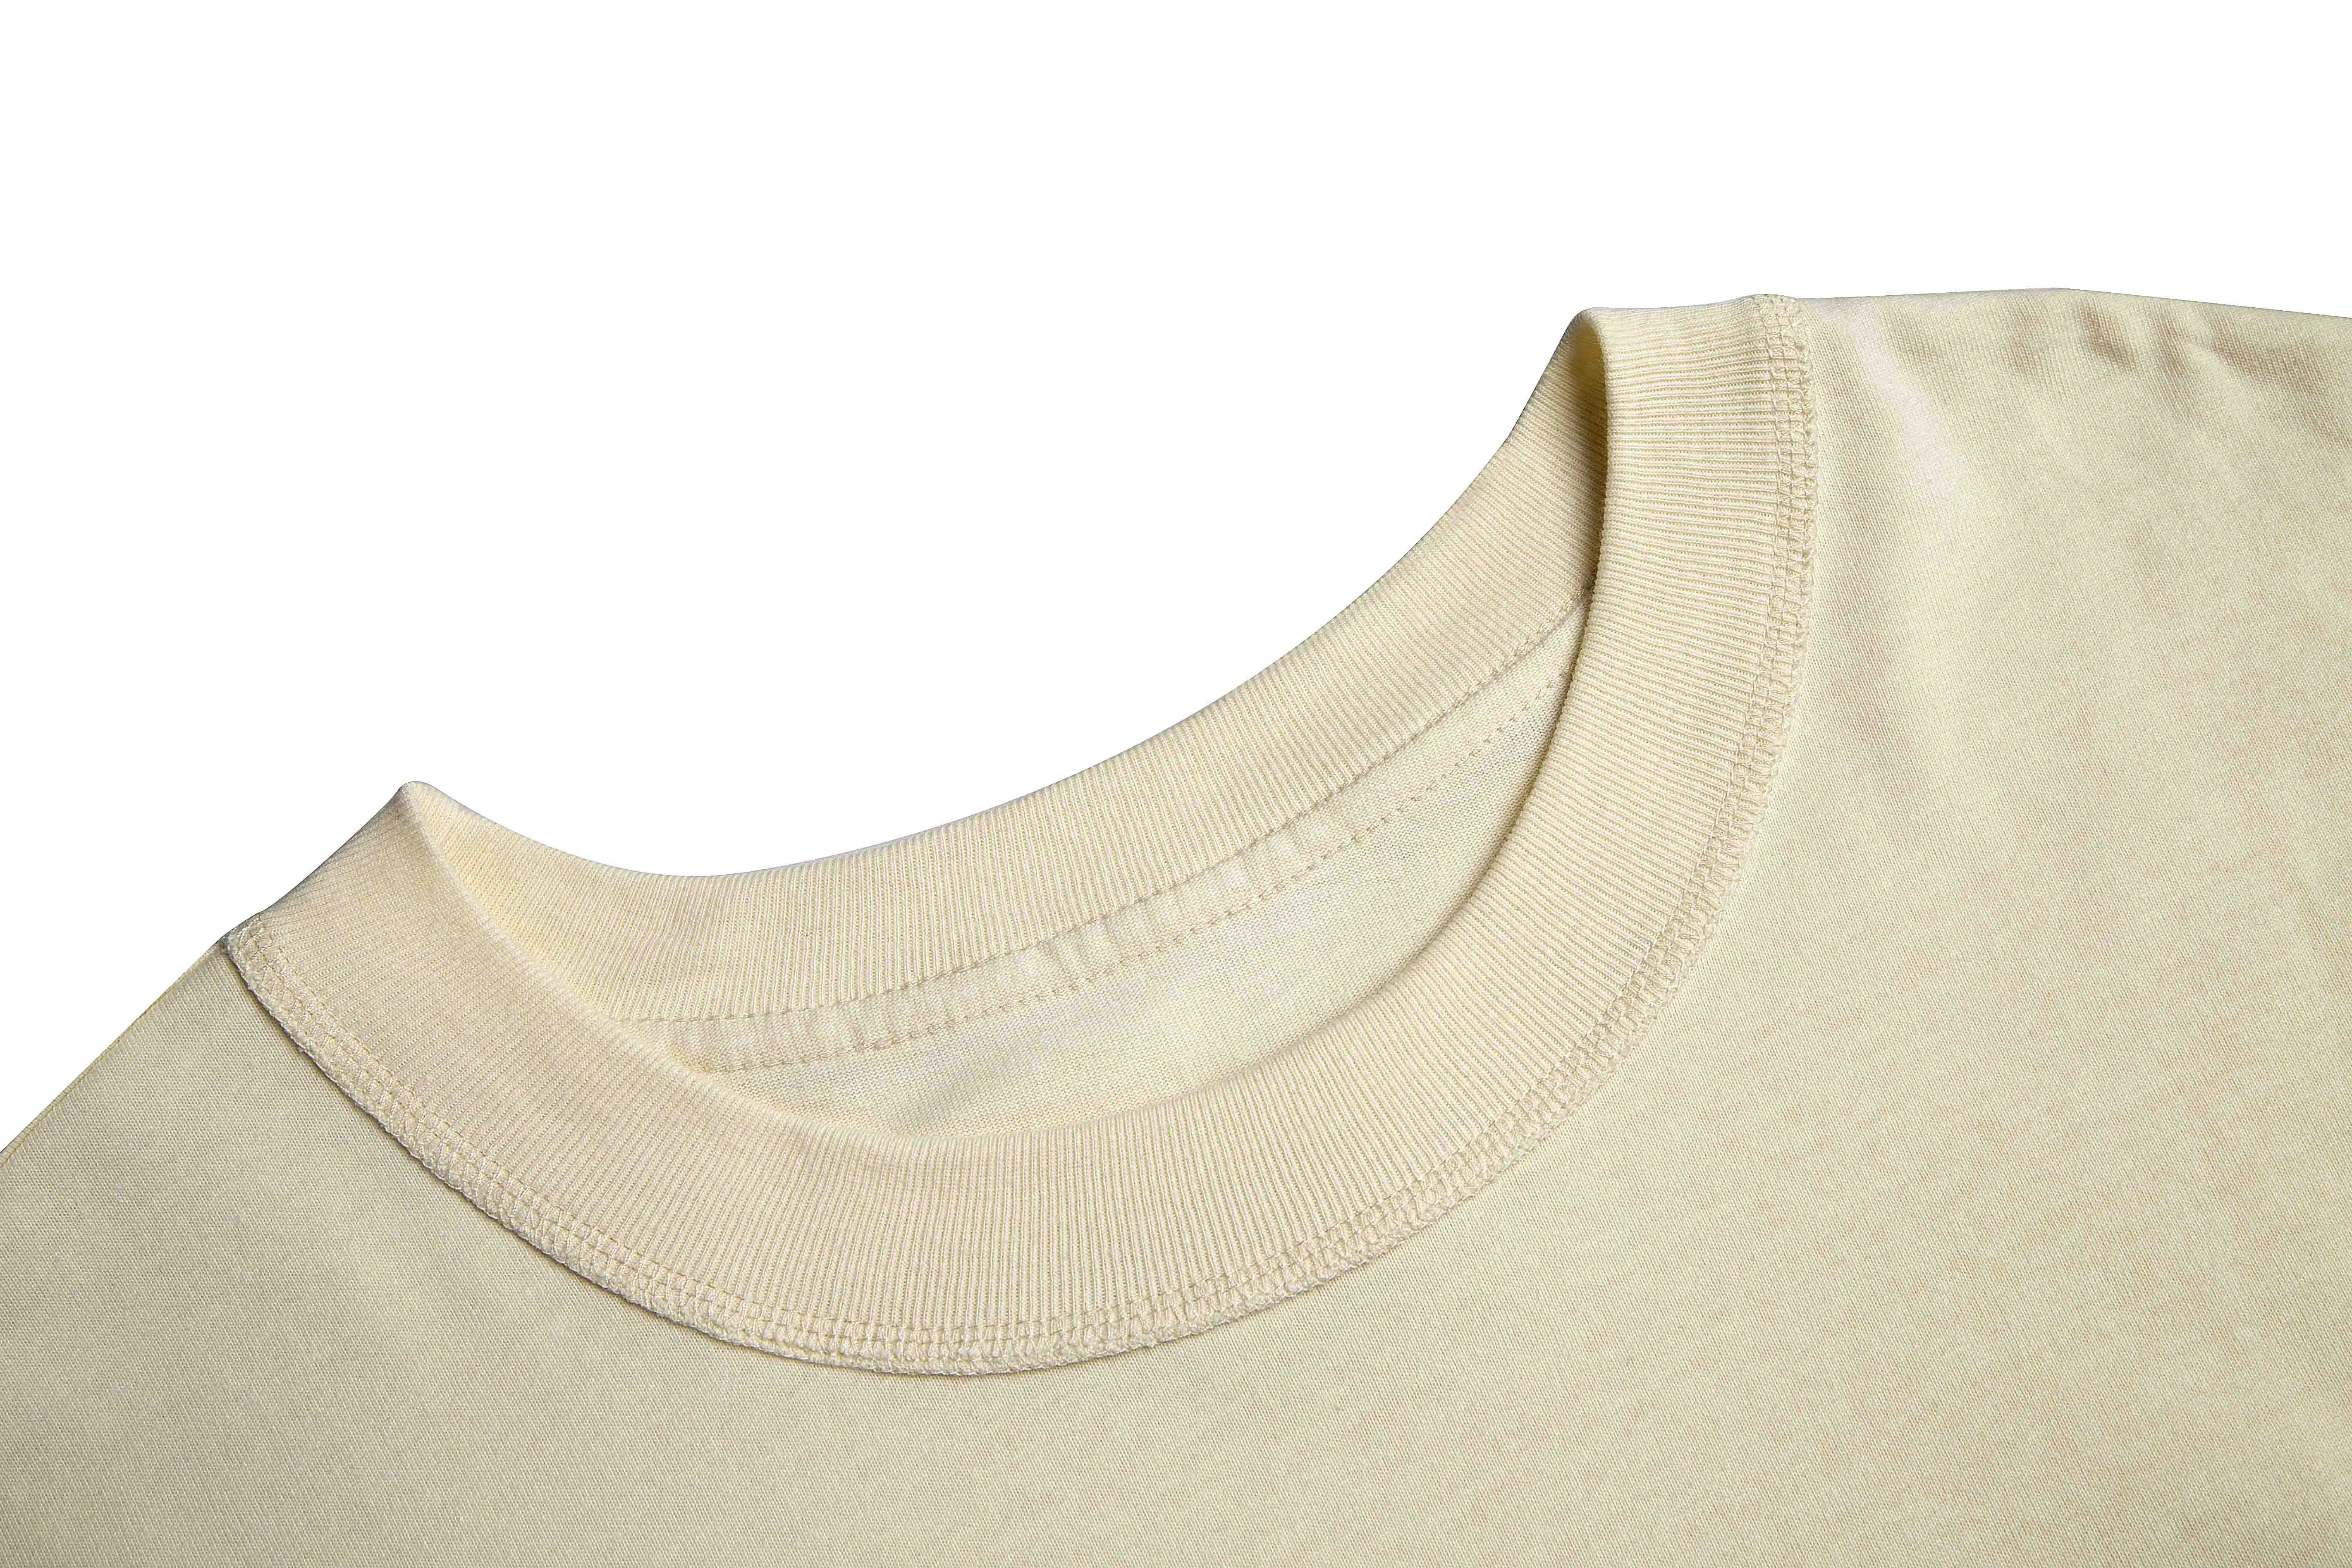 

FOG FEAR OF GOD 6TH FG T-Shirt INSIDE OUT Tee 4 color Size XS-L